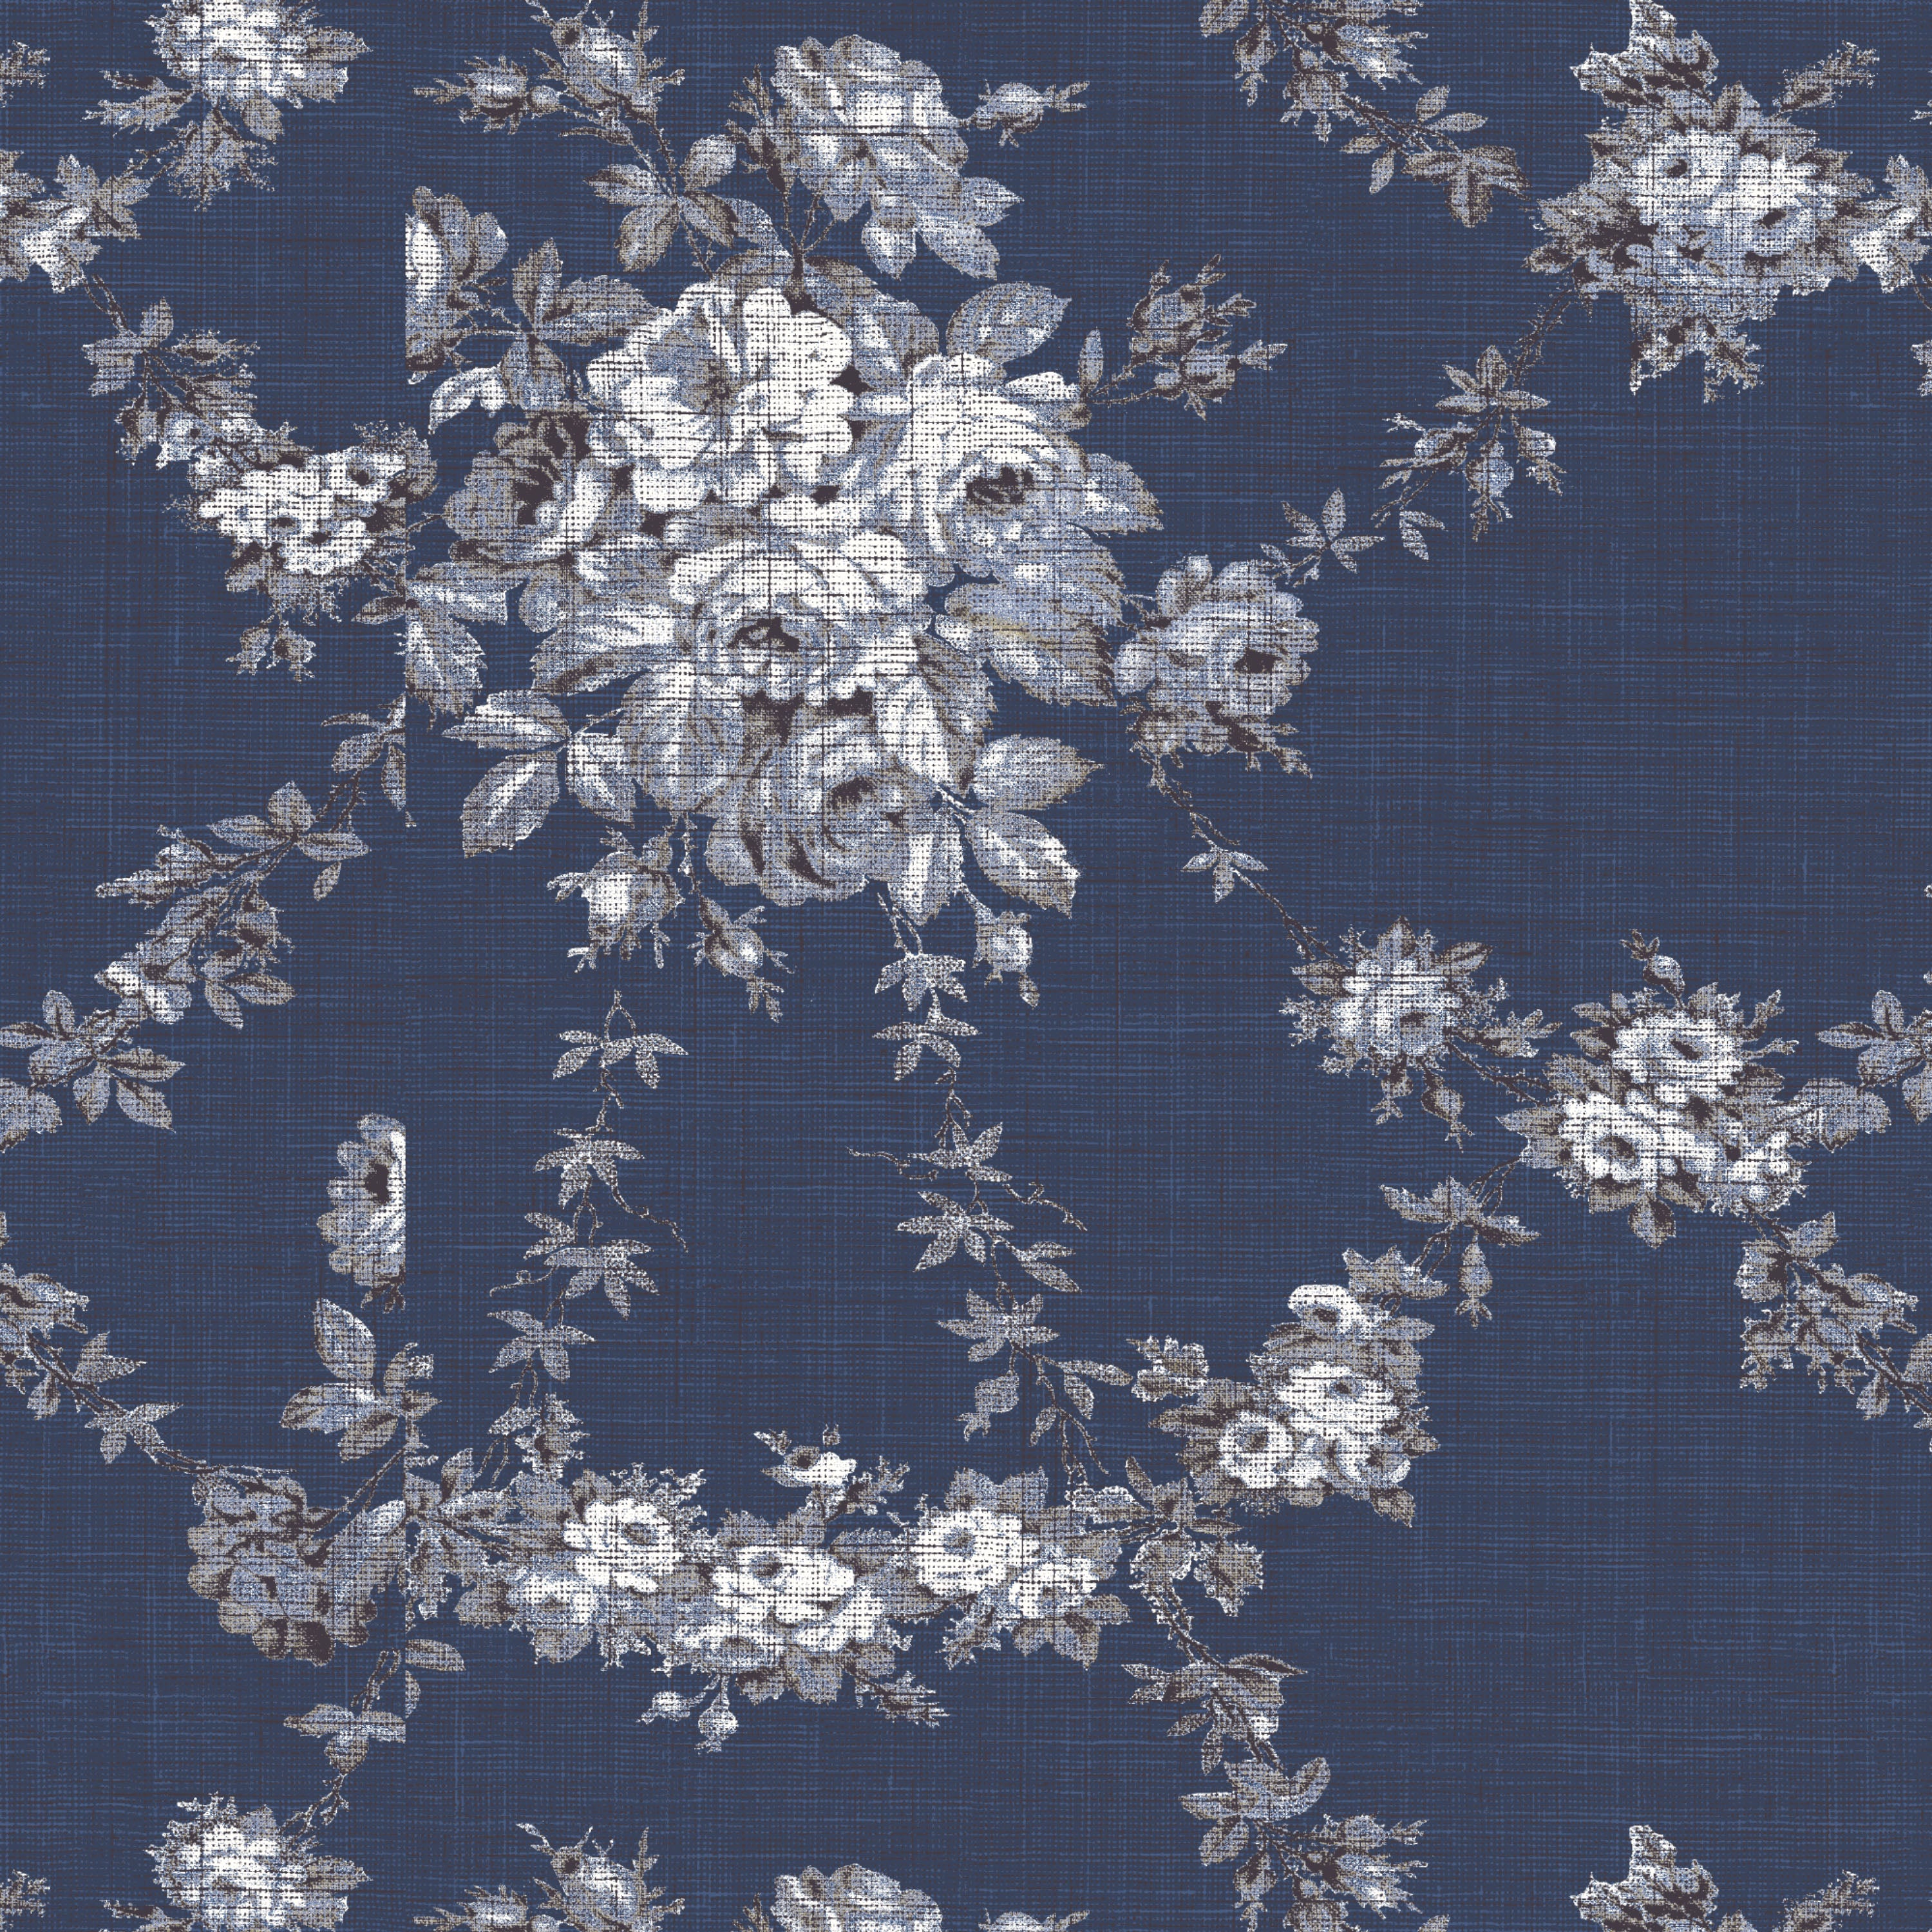 Waverly Inspirations 100% Cotton Duck 45" Width Dis-Floral Navy Color Sewing Fabric by the Yard